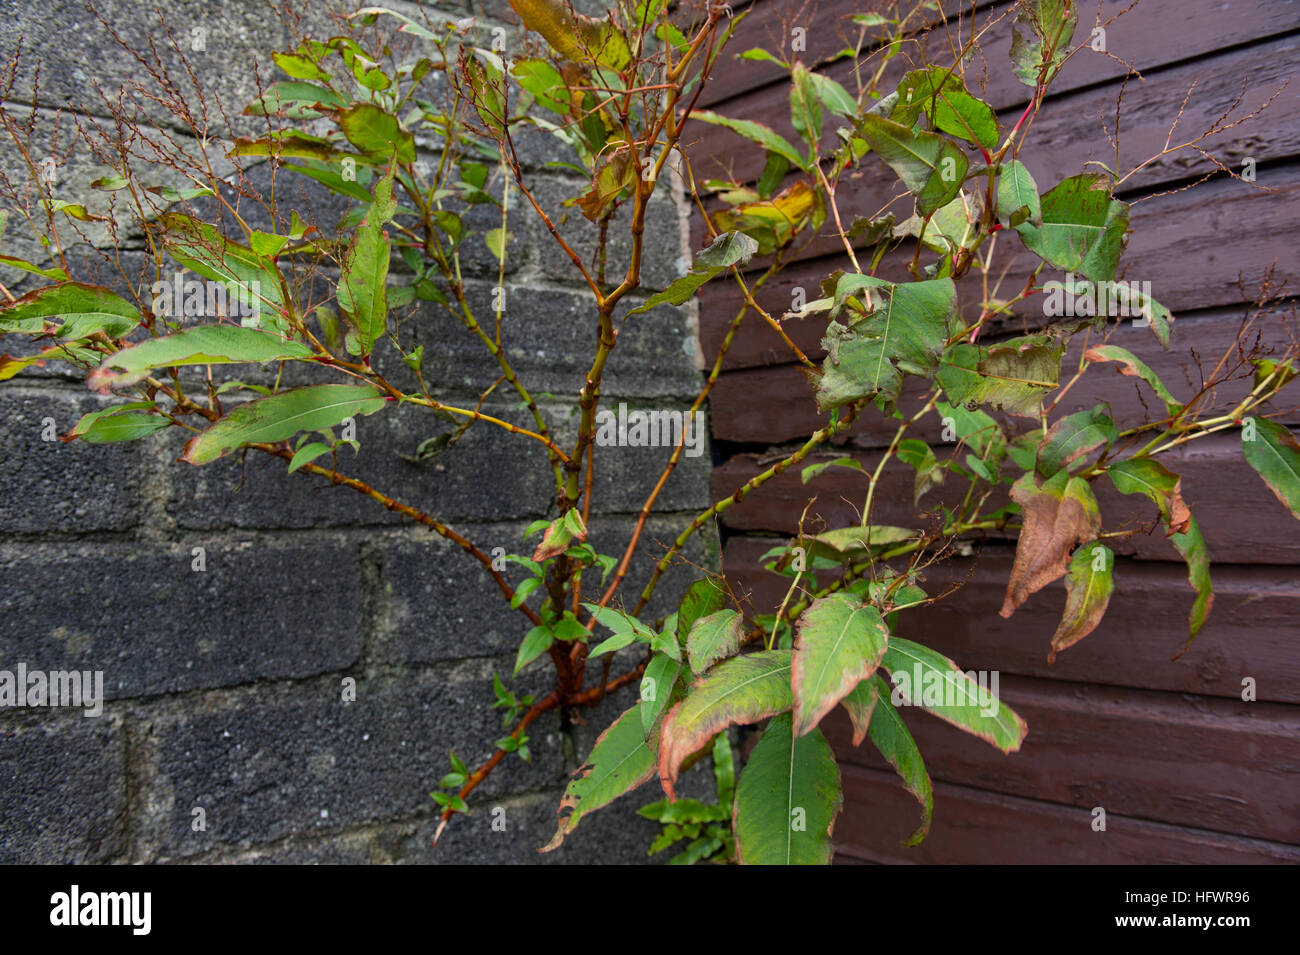 Paul & Teresa Hunter with the Himalayan knotweed invading their garden in Cornwall,UK. Stock Photo